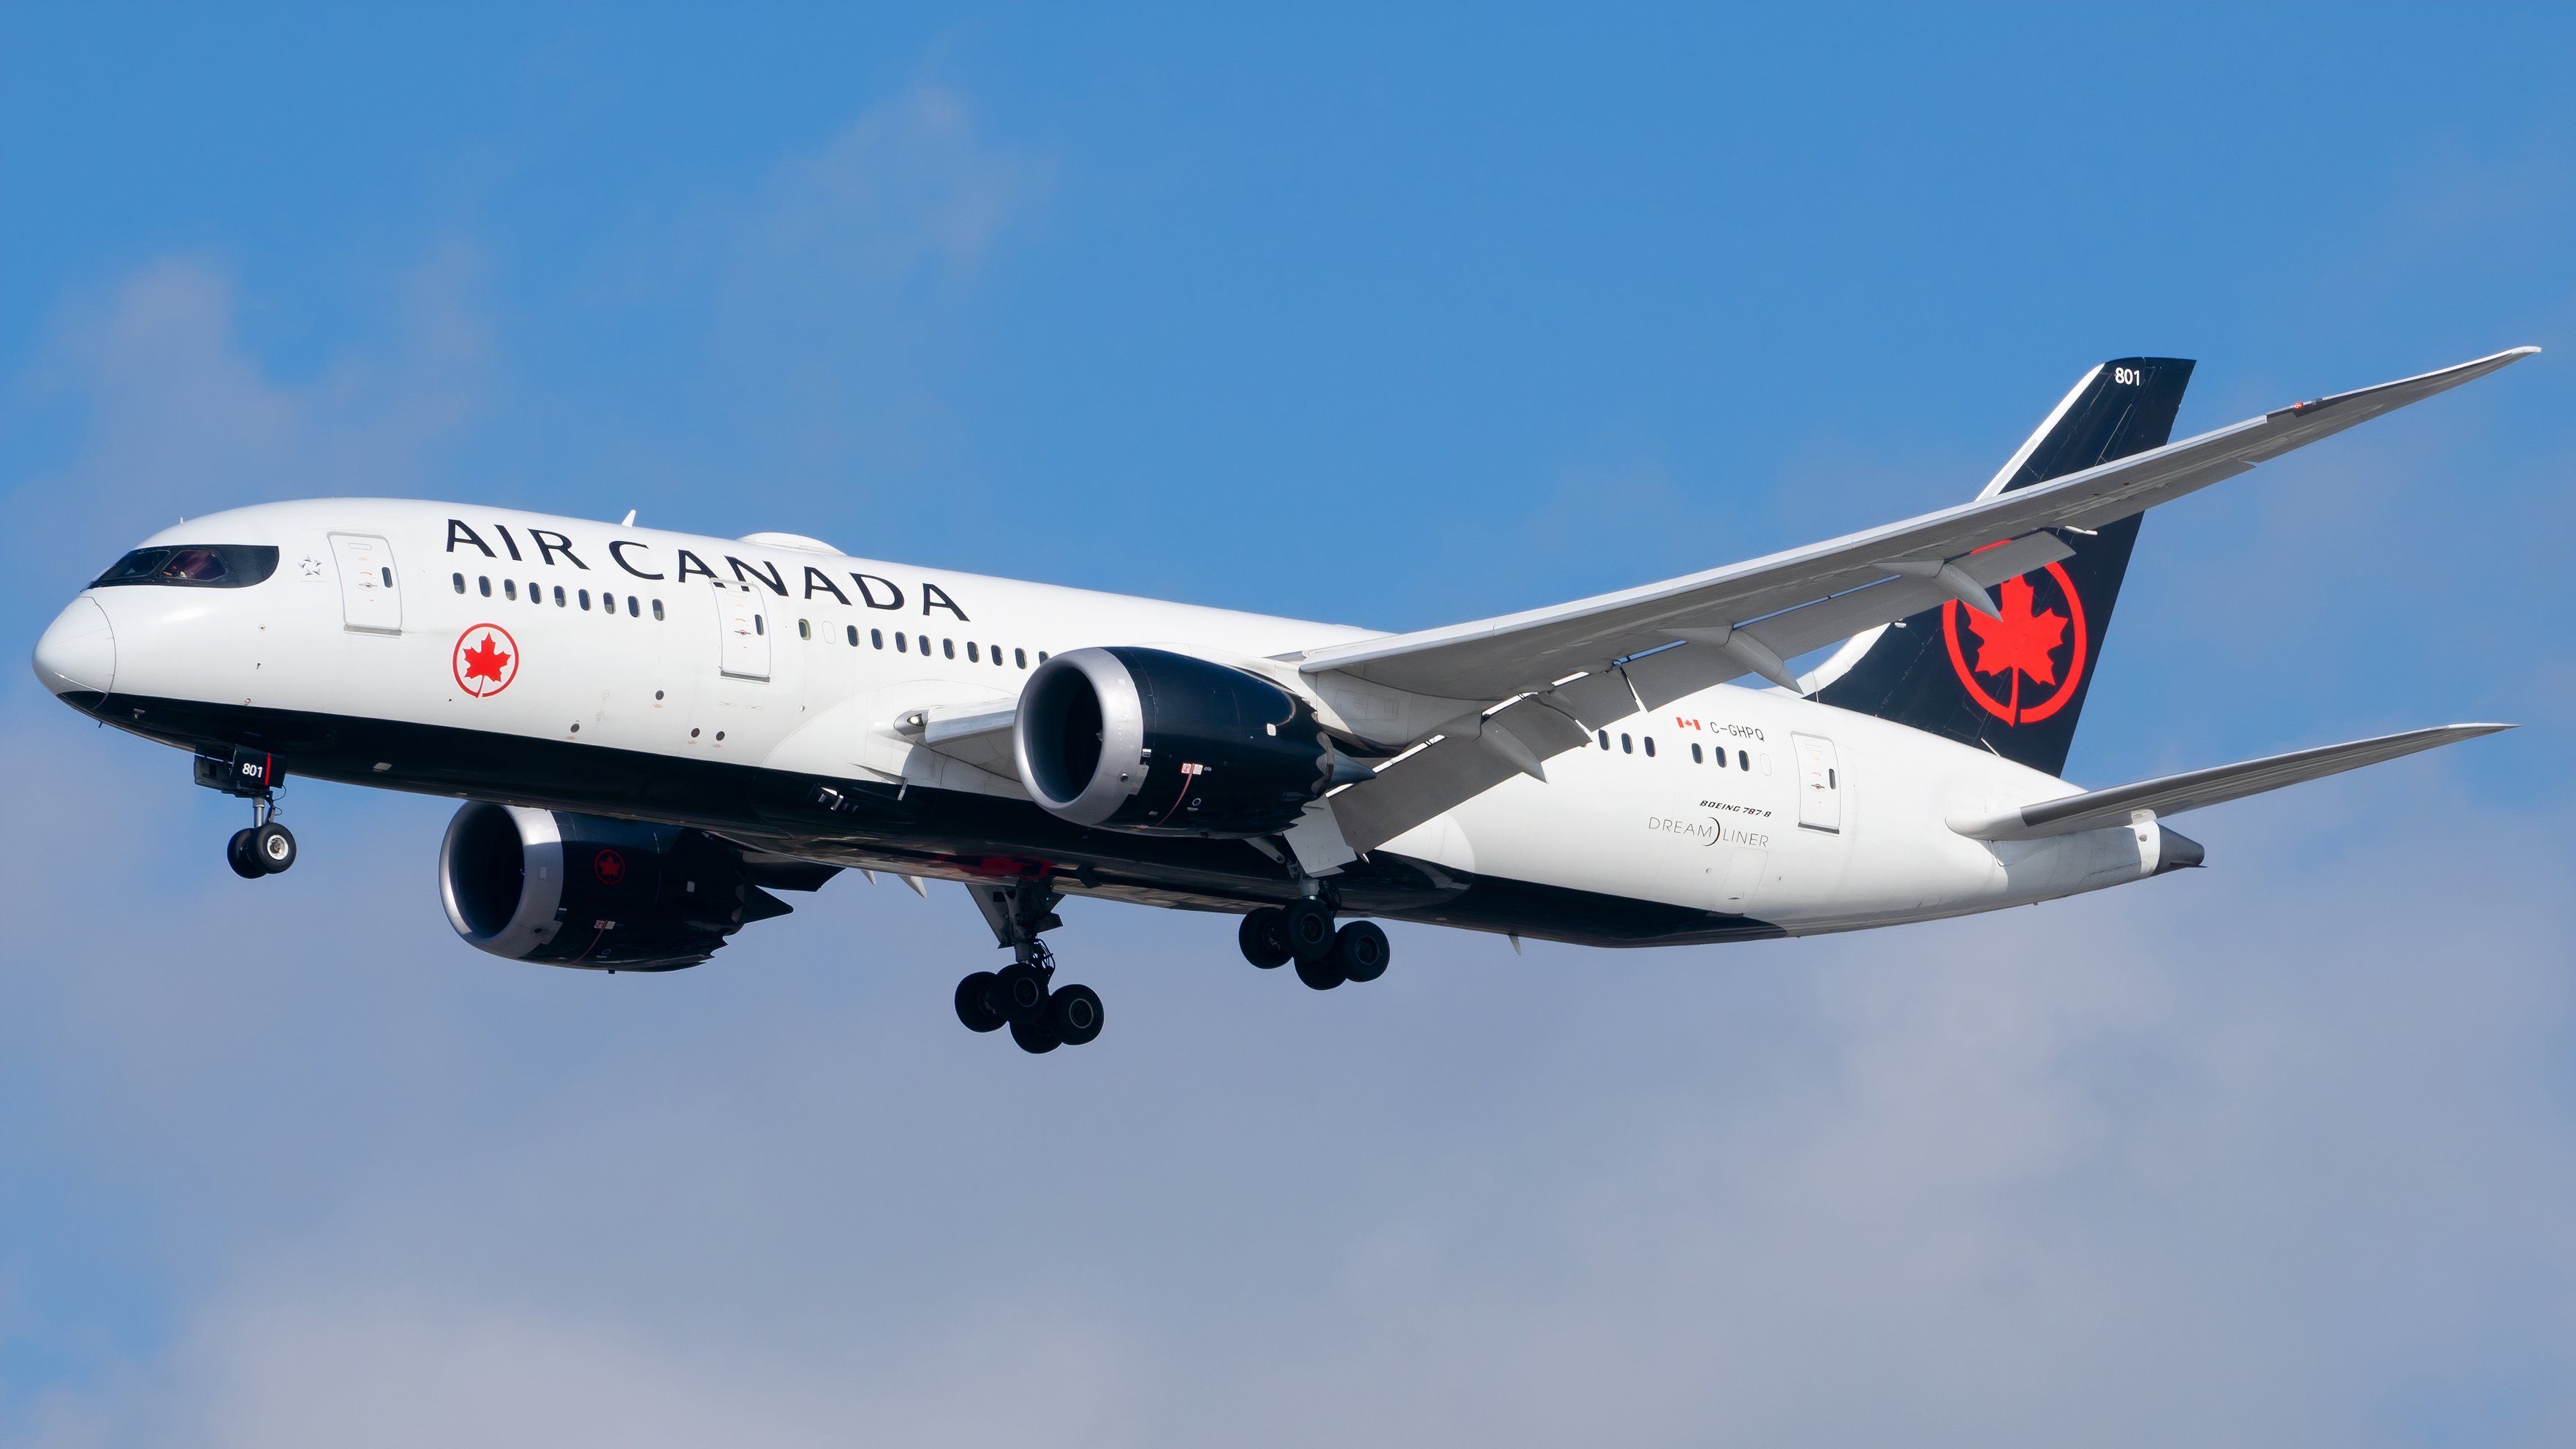 An Air Canada Boeing 787 Dreamliner on final approach into LAX.